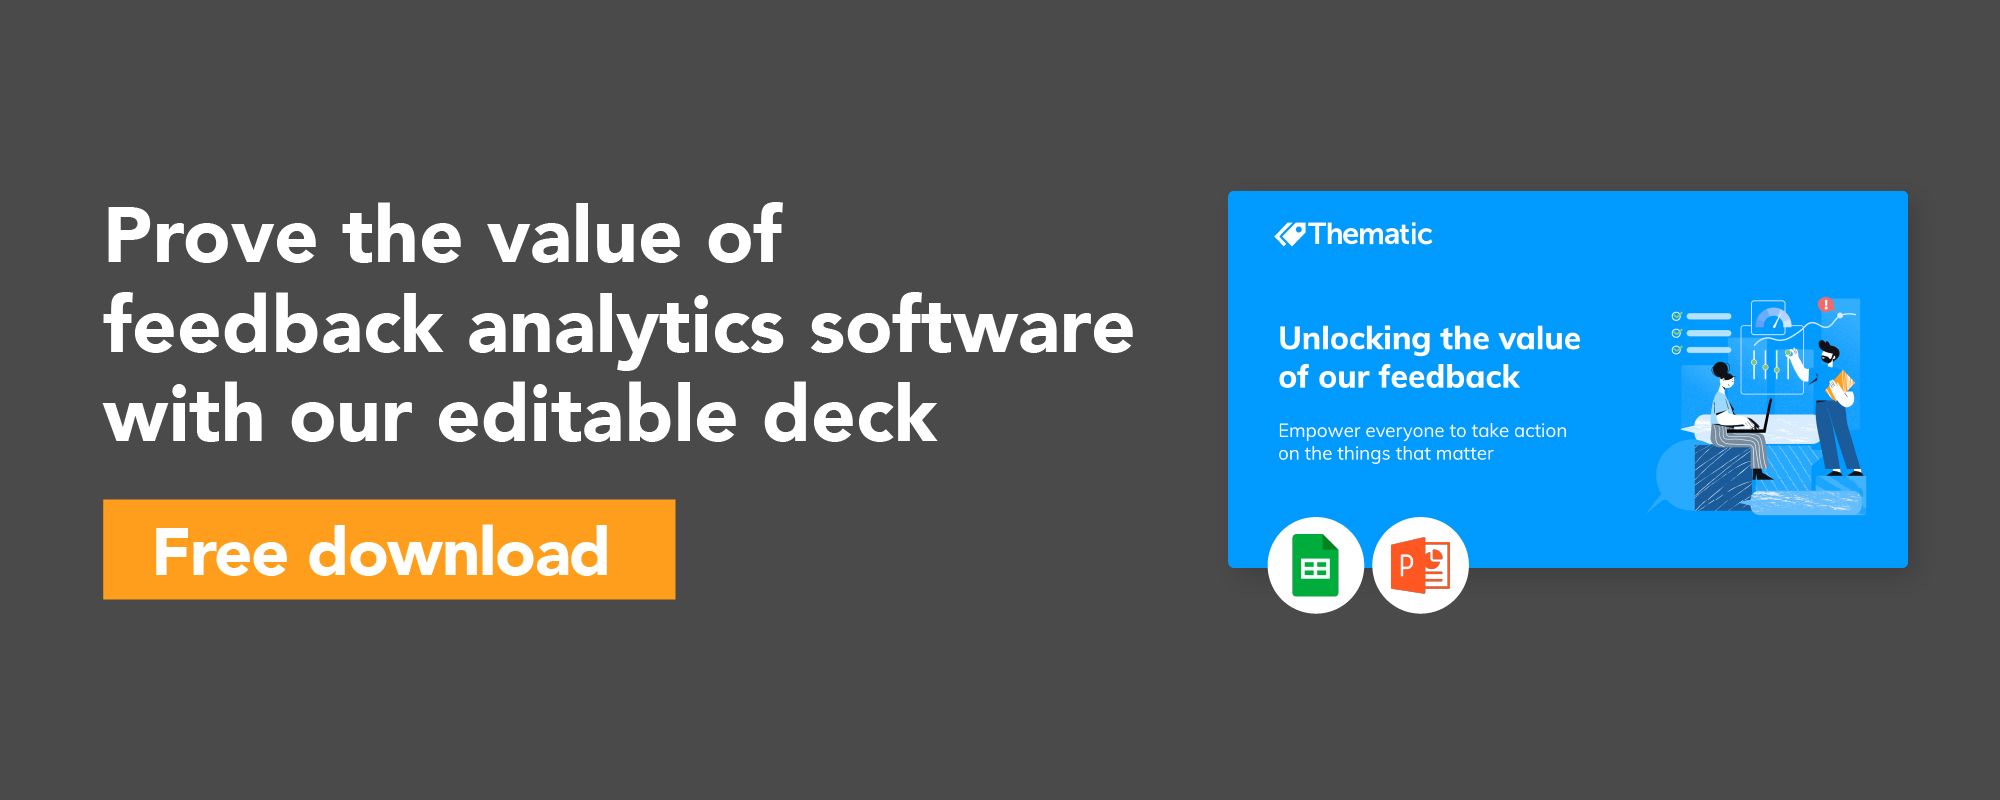 Free download to prove the value of feedback analytics software